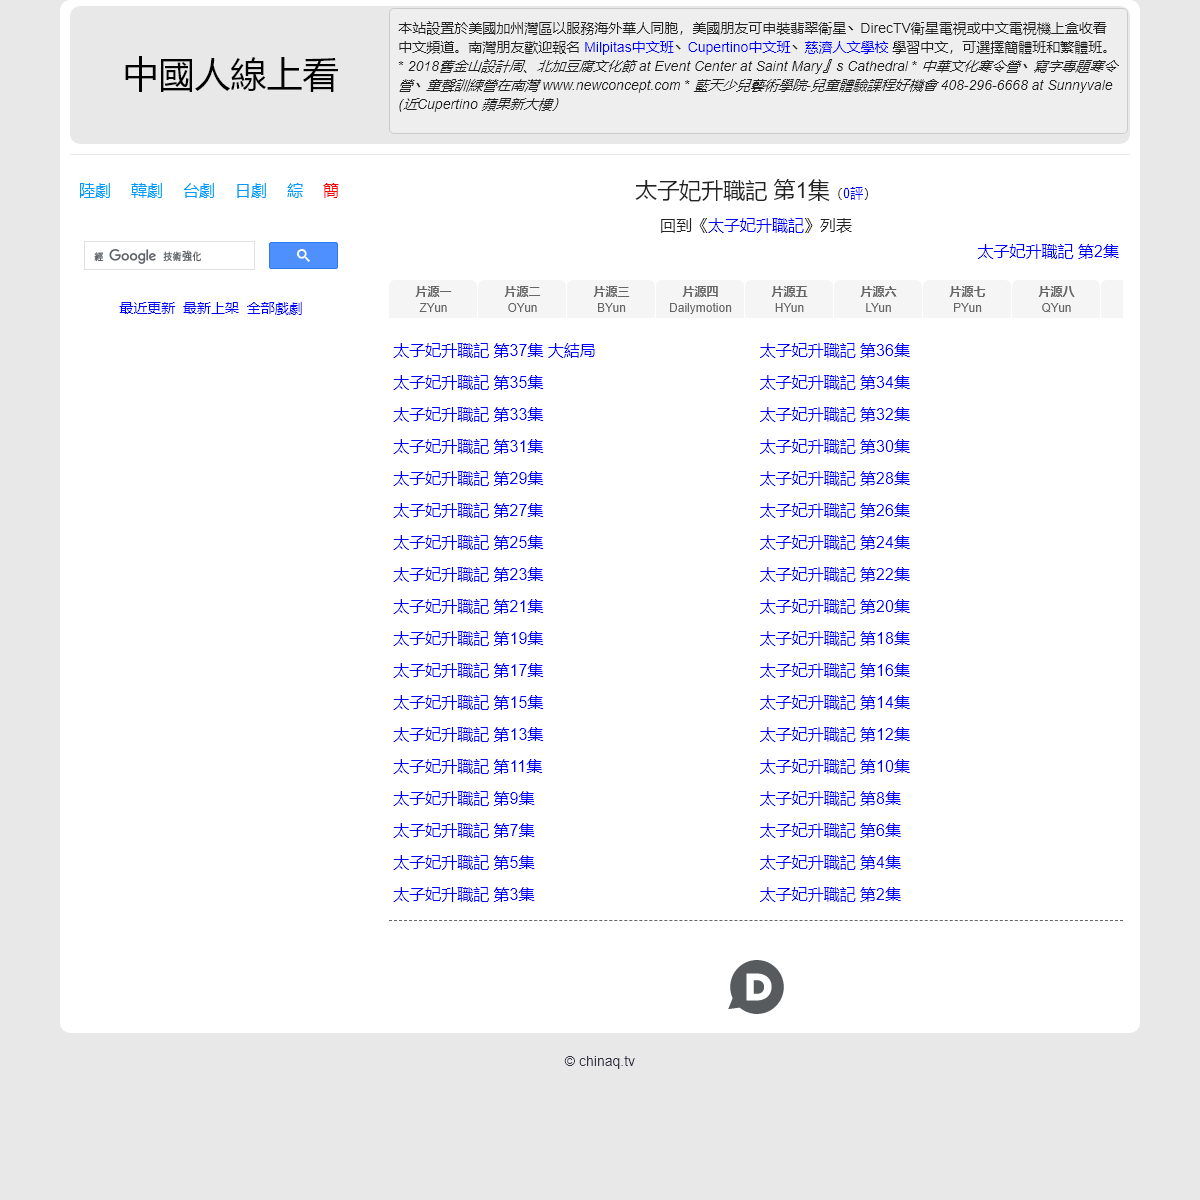 A complete backup of https://chinaq.tv/go-pricess-go/1.html